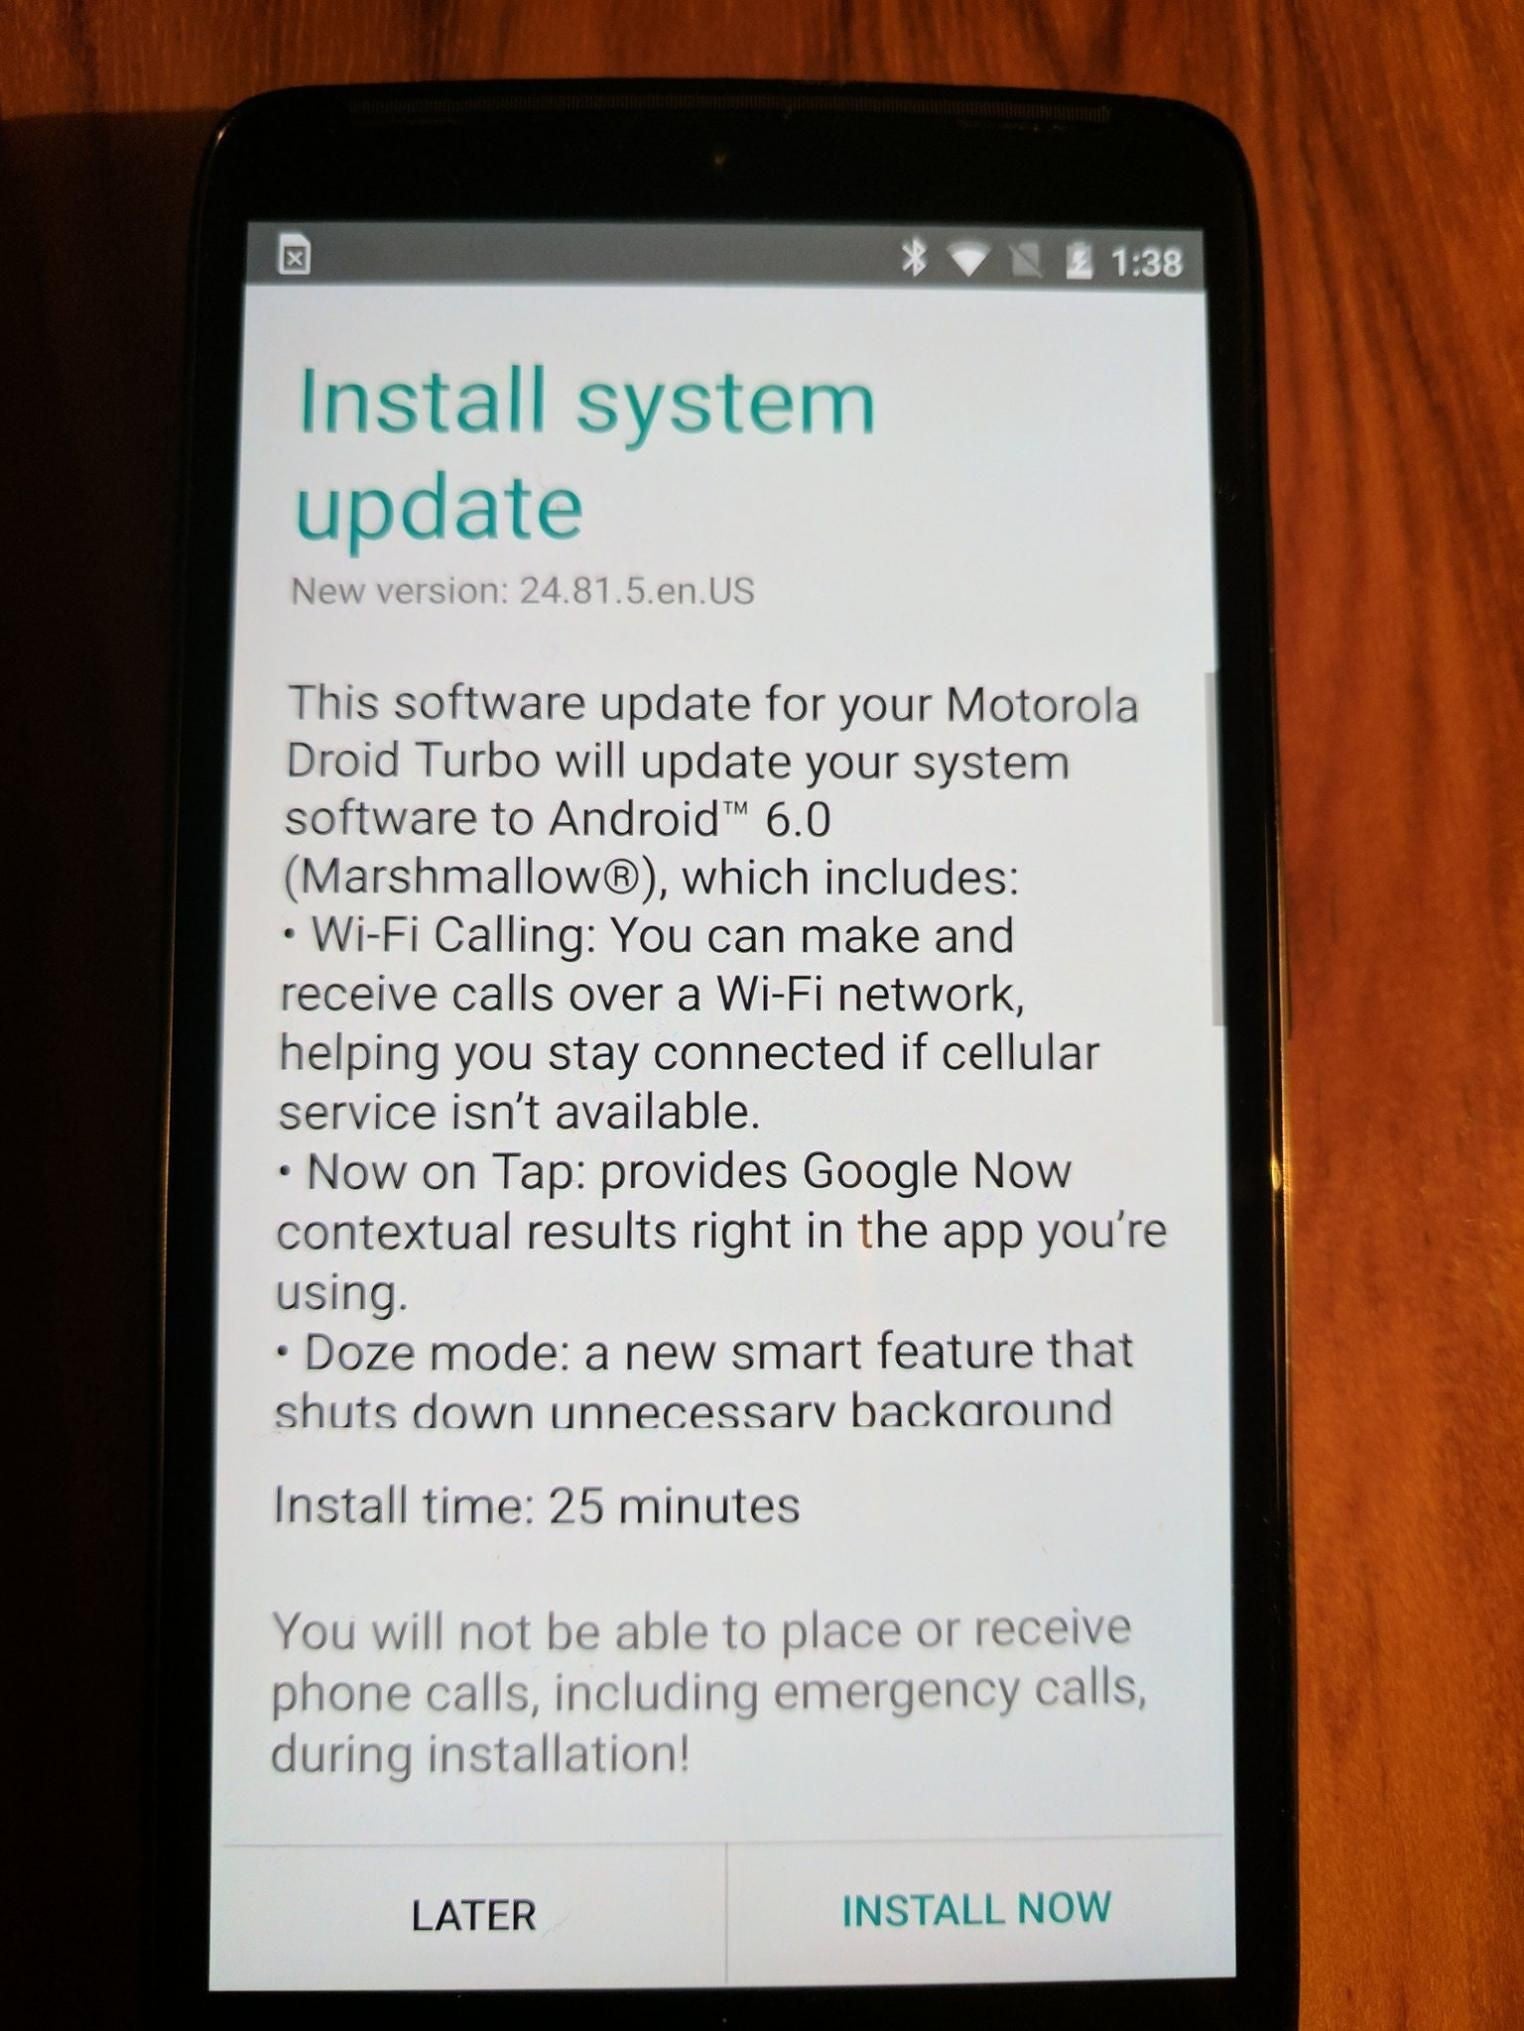 Motorola DROID Turbo finally getting Android 6.0.1 Marshmallow update